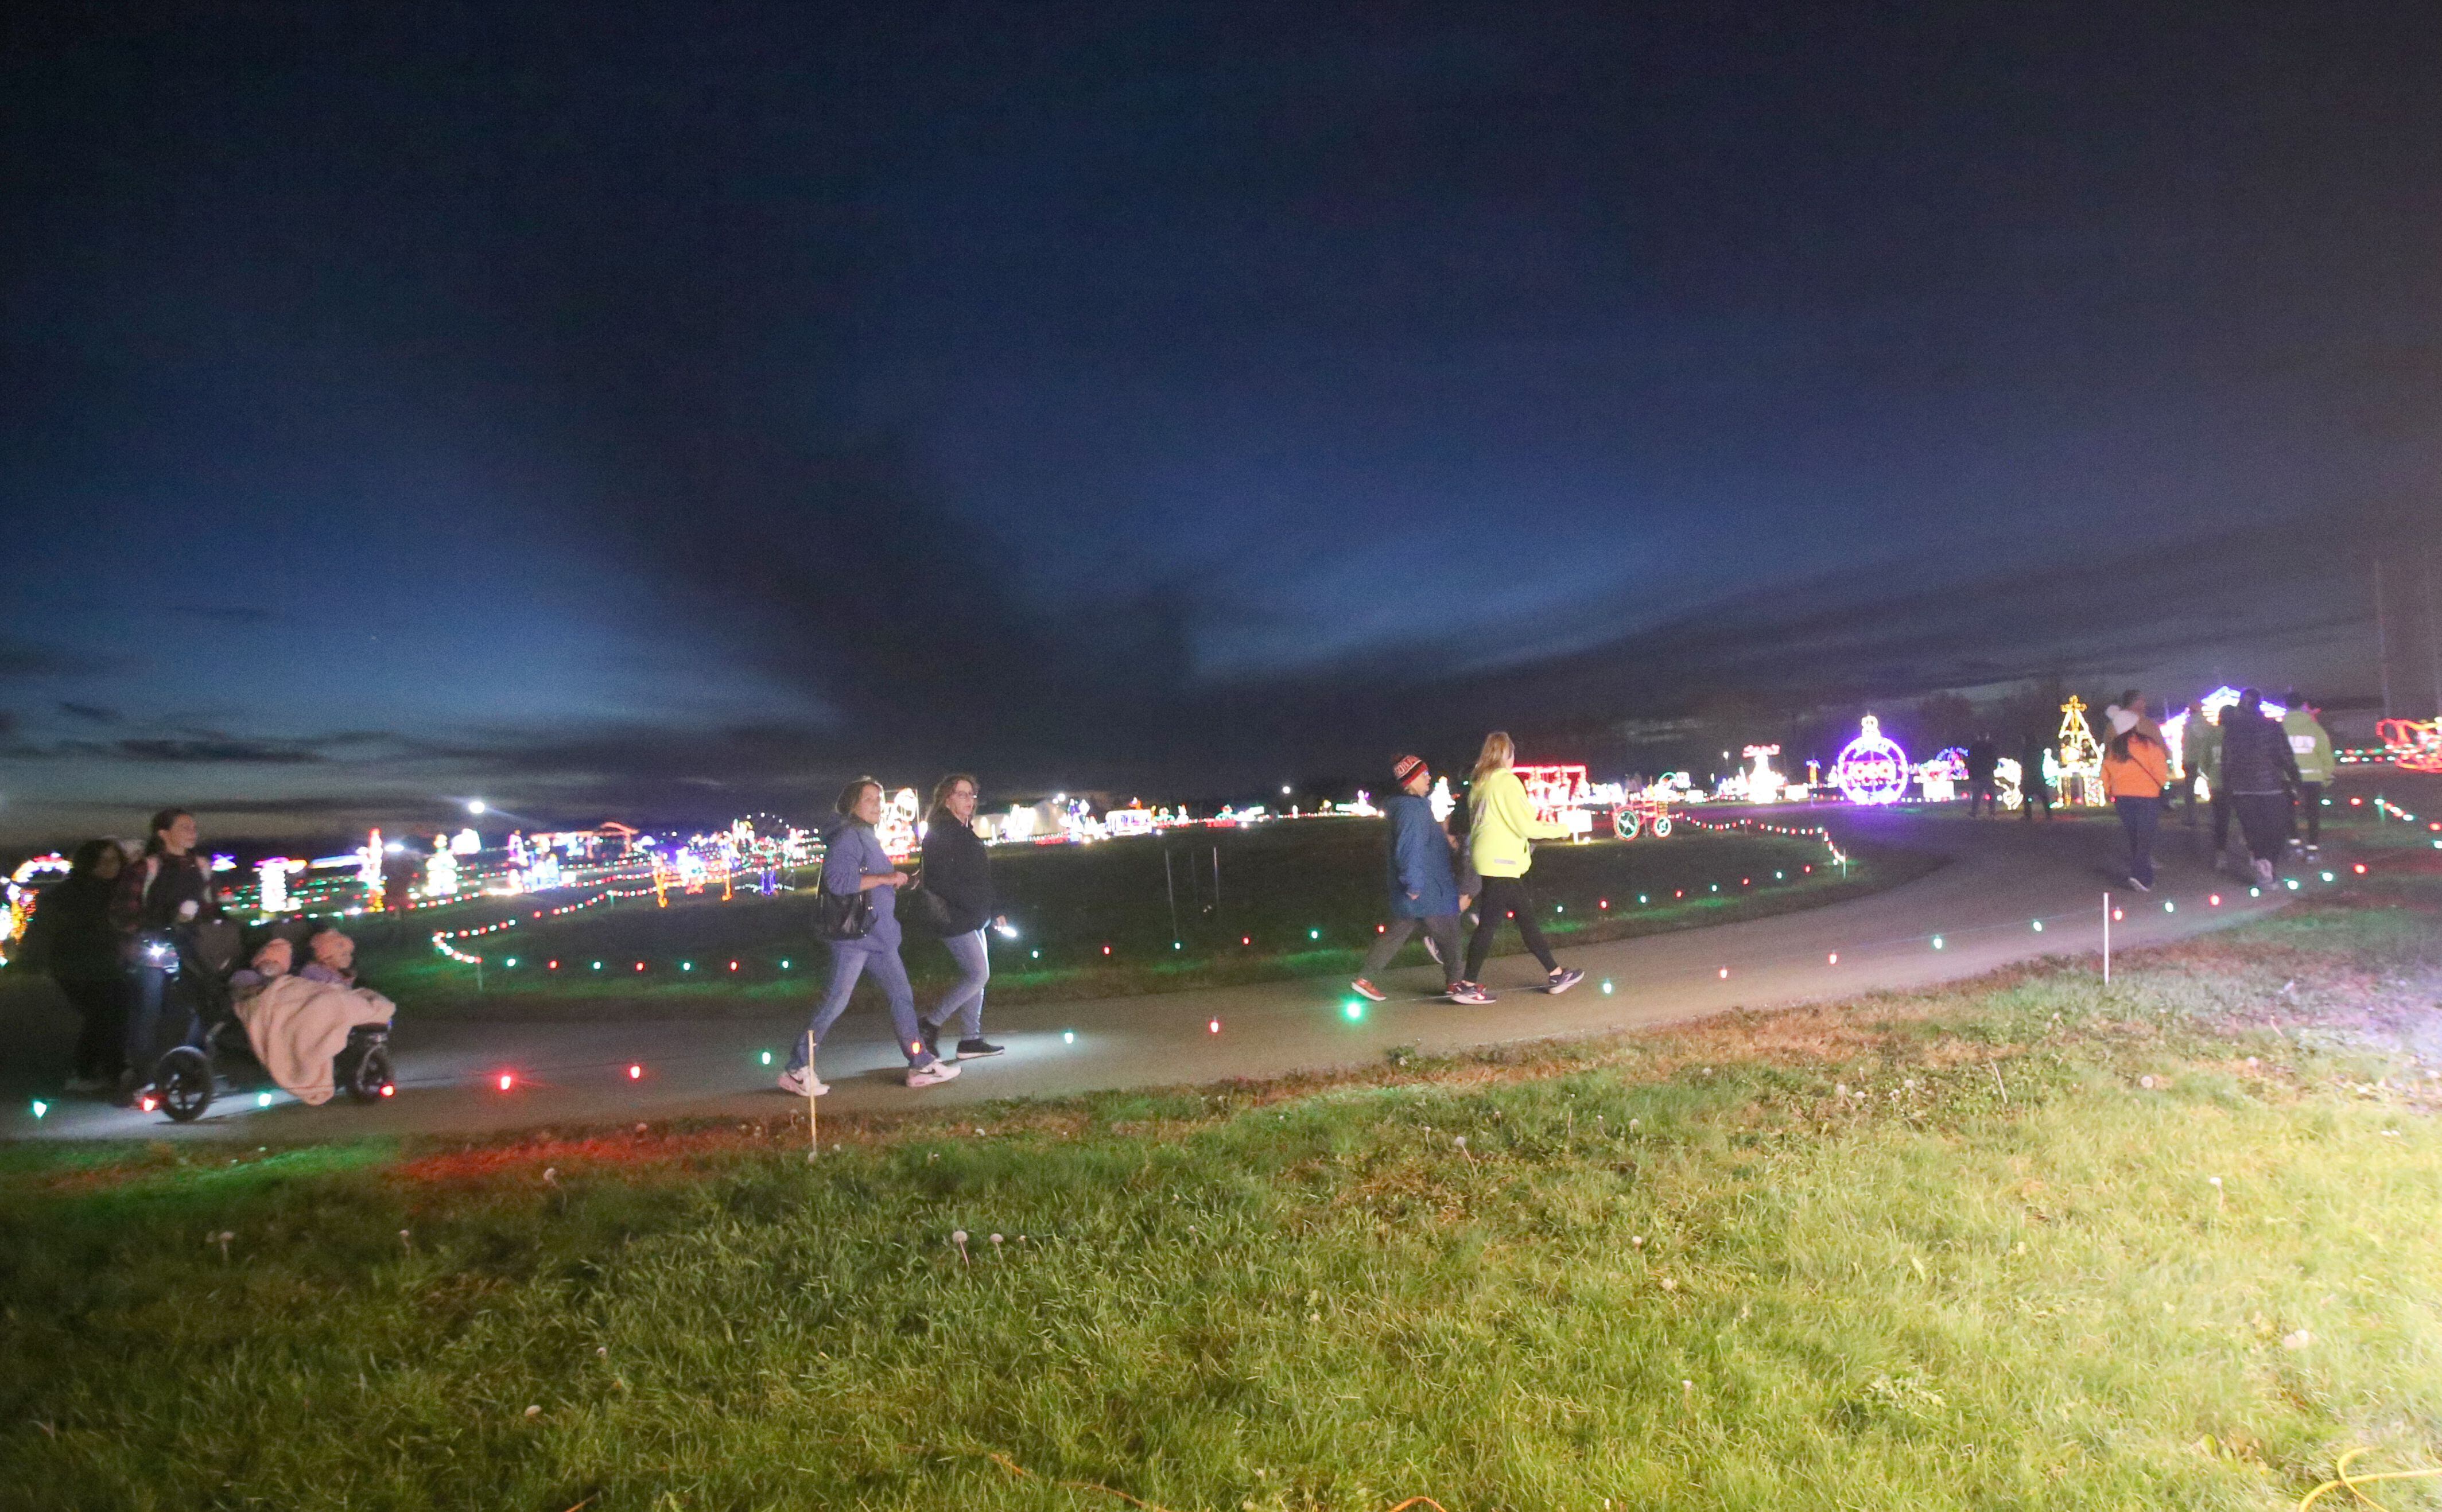 Participants make their way through the  Run Run Rudolph 5K Fun Run on Sunday, Nov. 5, 2023 at Rotary Park in La Salle. The Celebration Of Lights is the area’s largest drive-thru Christmas light display, stretching throughout Rotary Park on the east side of La Salle.